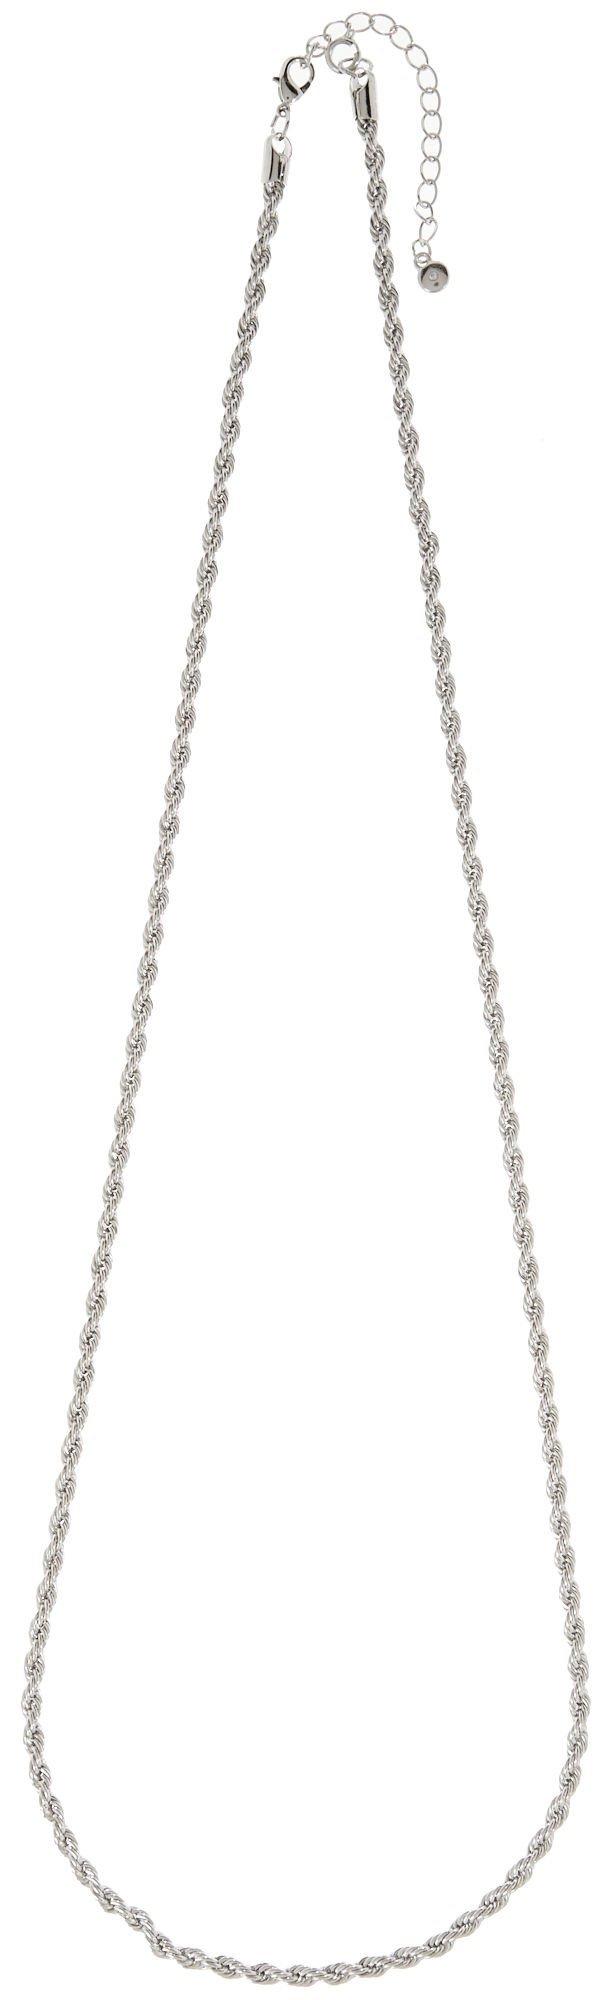 Wearable Art By Roman Silver Tone Rope Chain Necklace